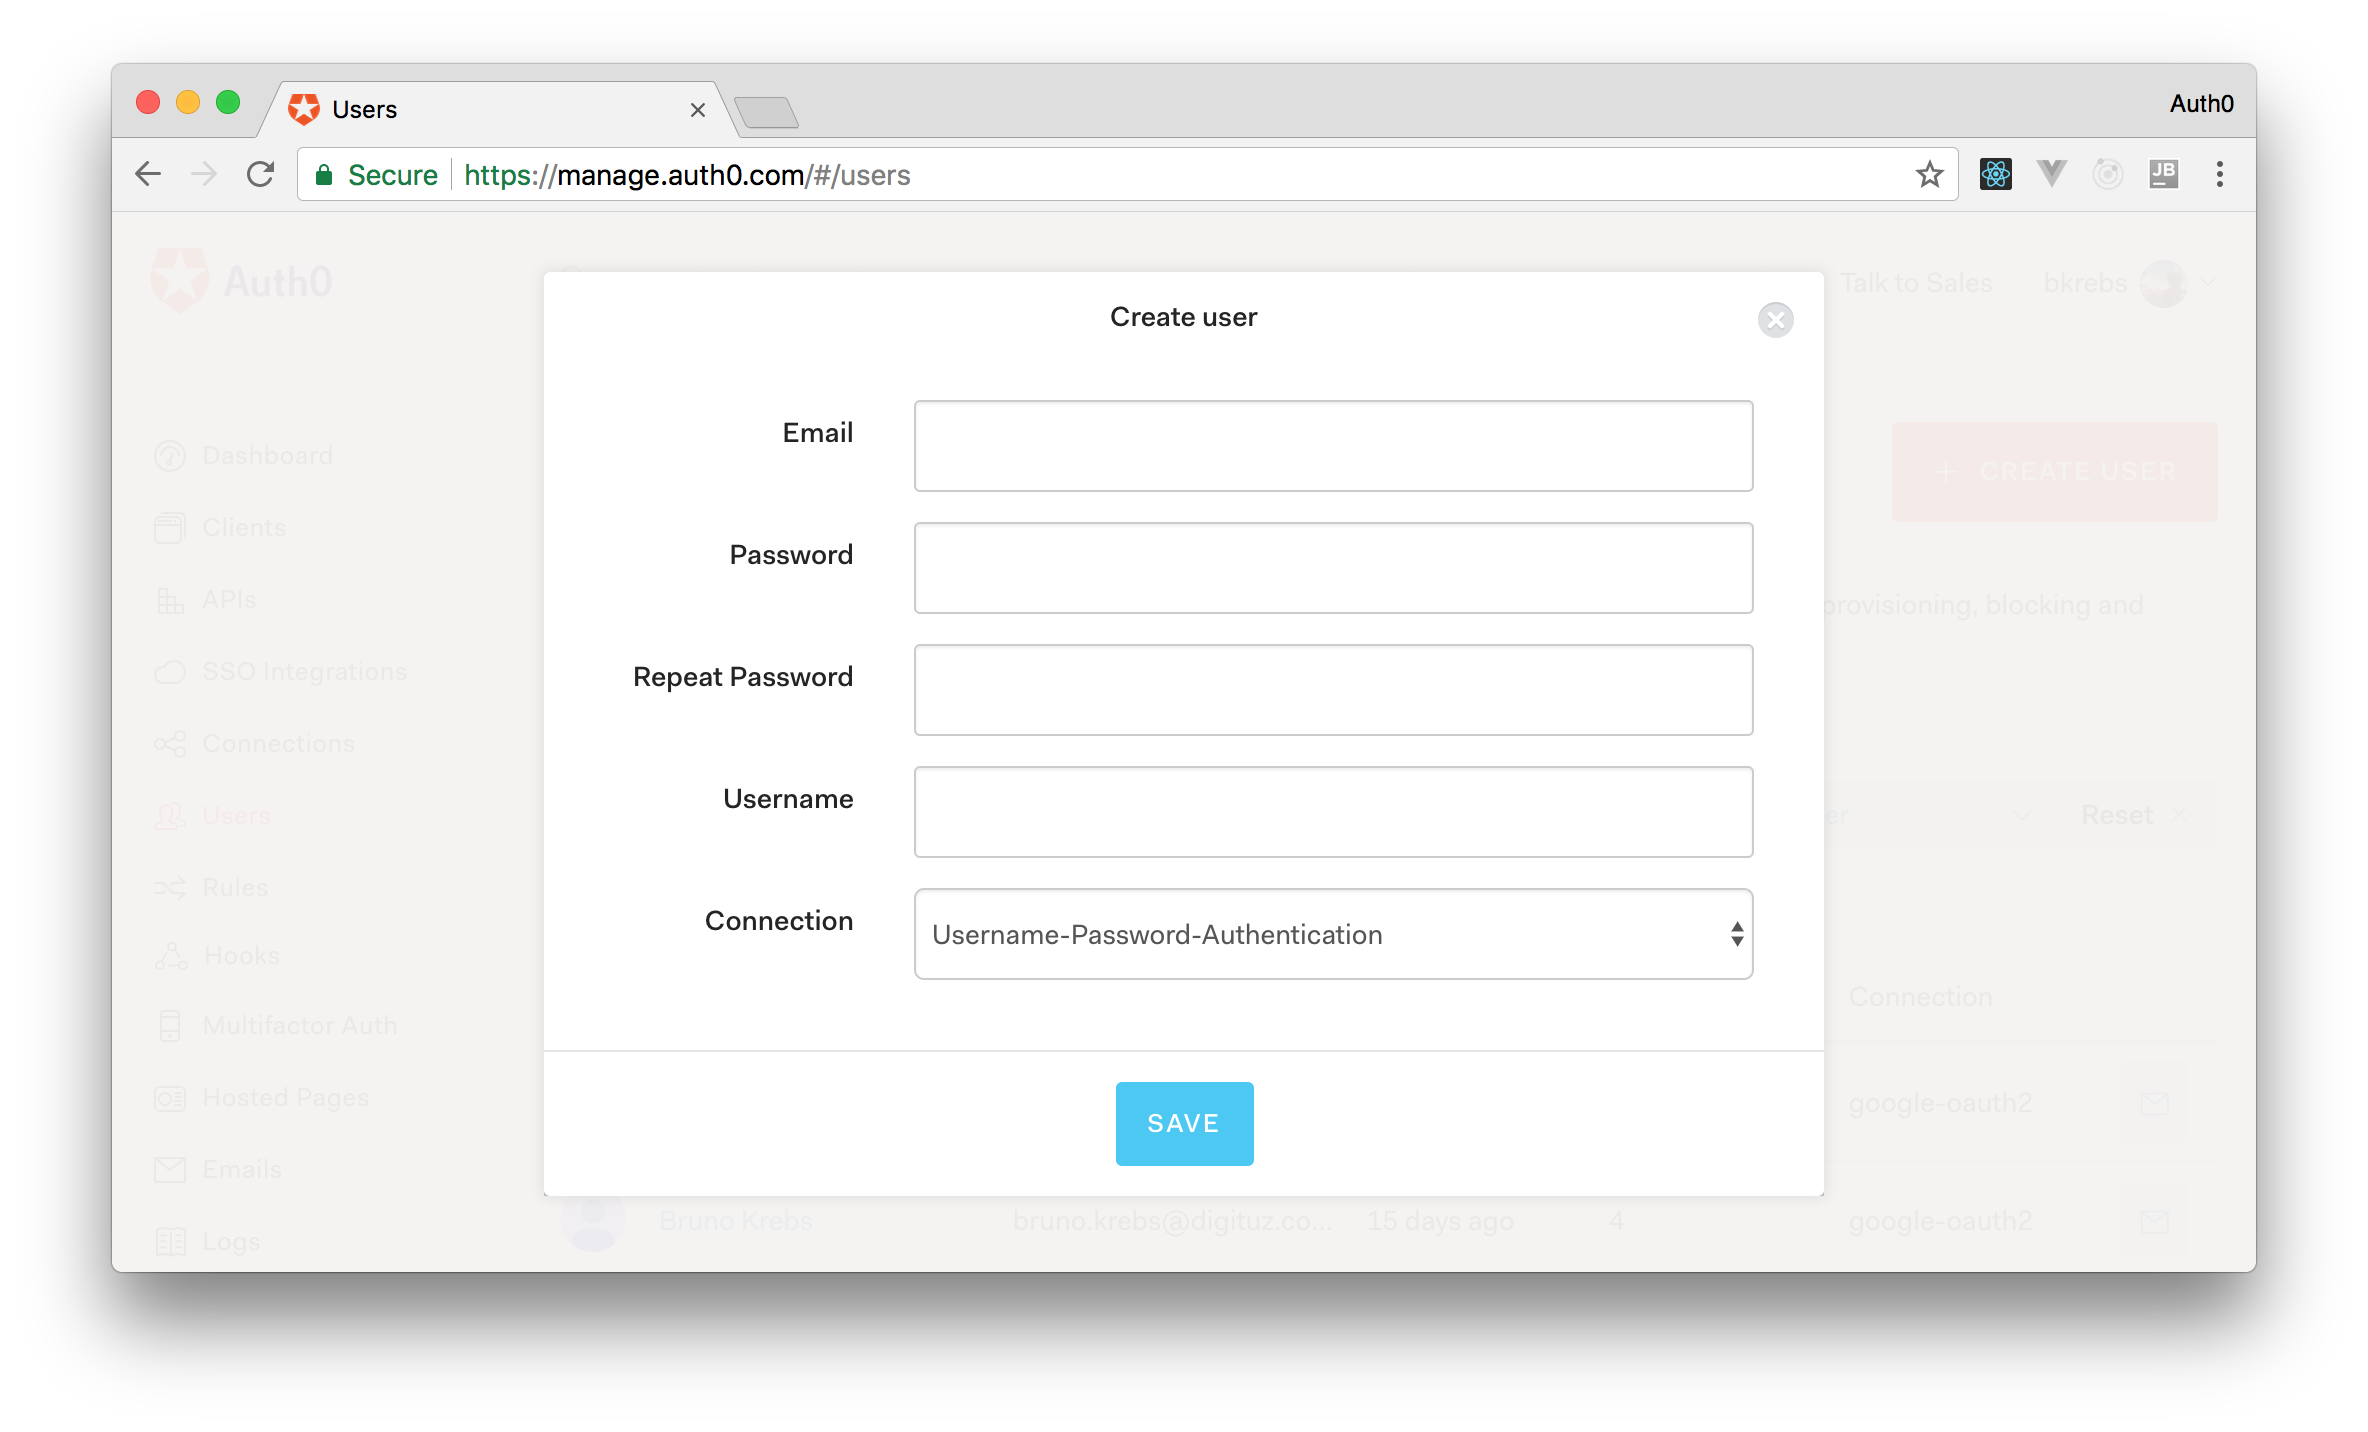 Creating users through the Auth0 management dashboard